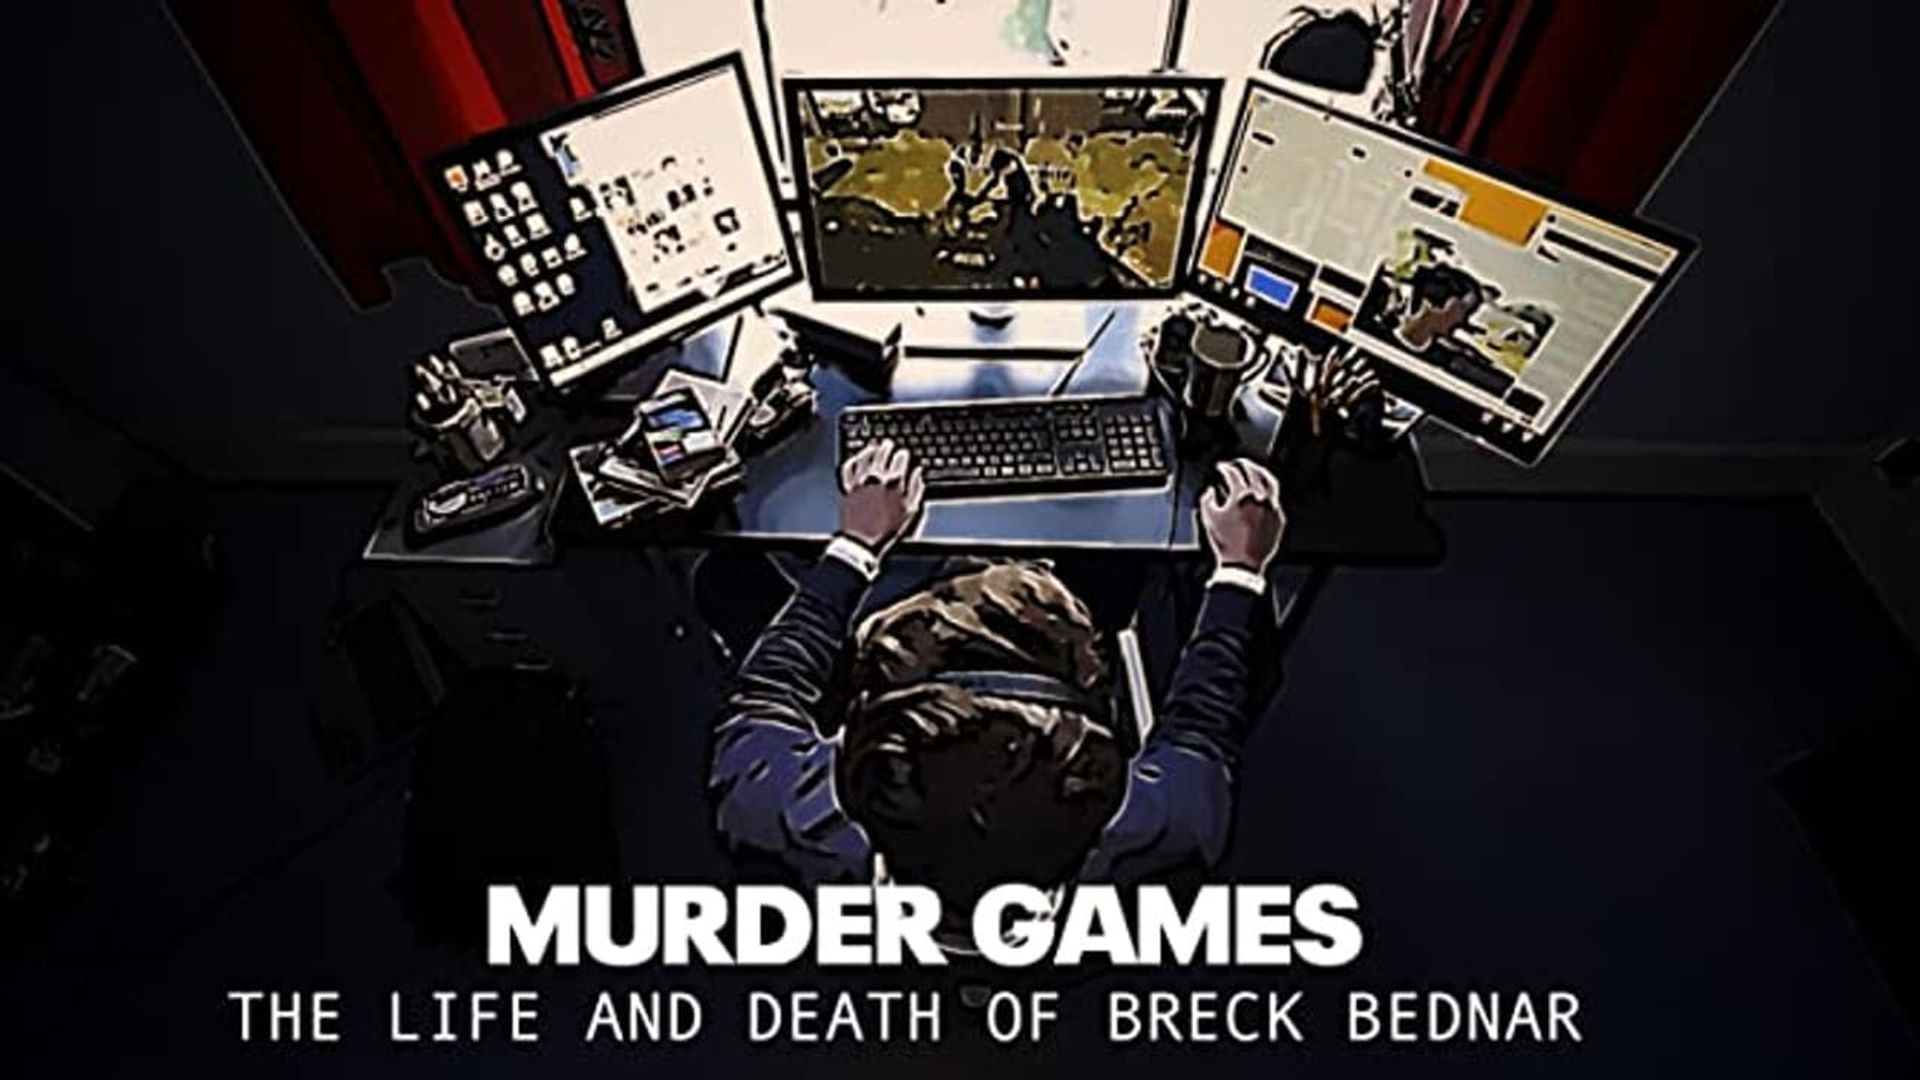 Murder Games: The Life and Death of Breck Bednar background